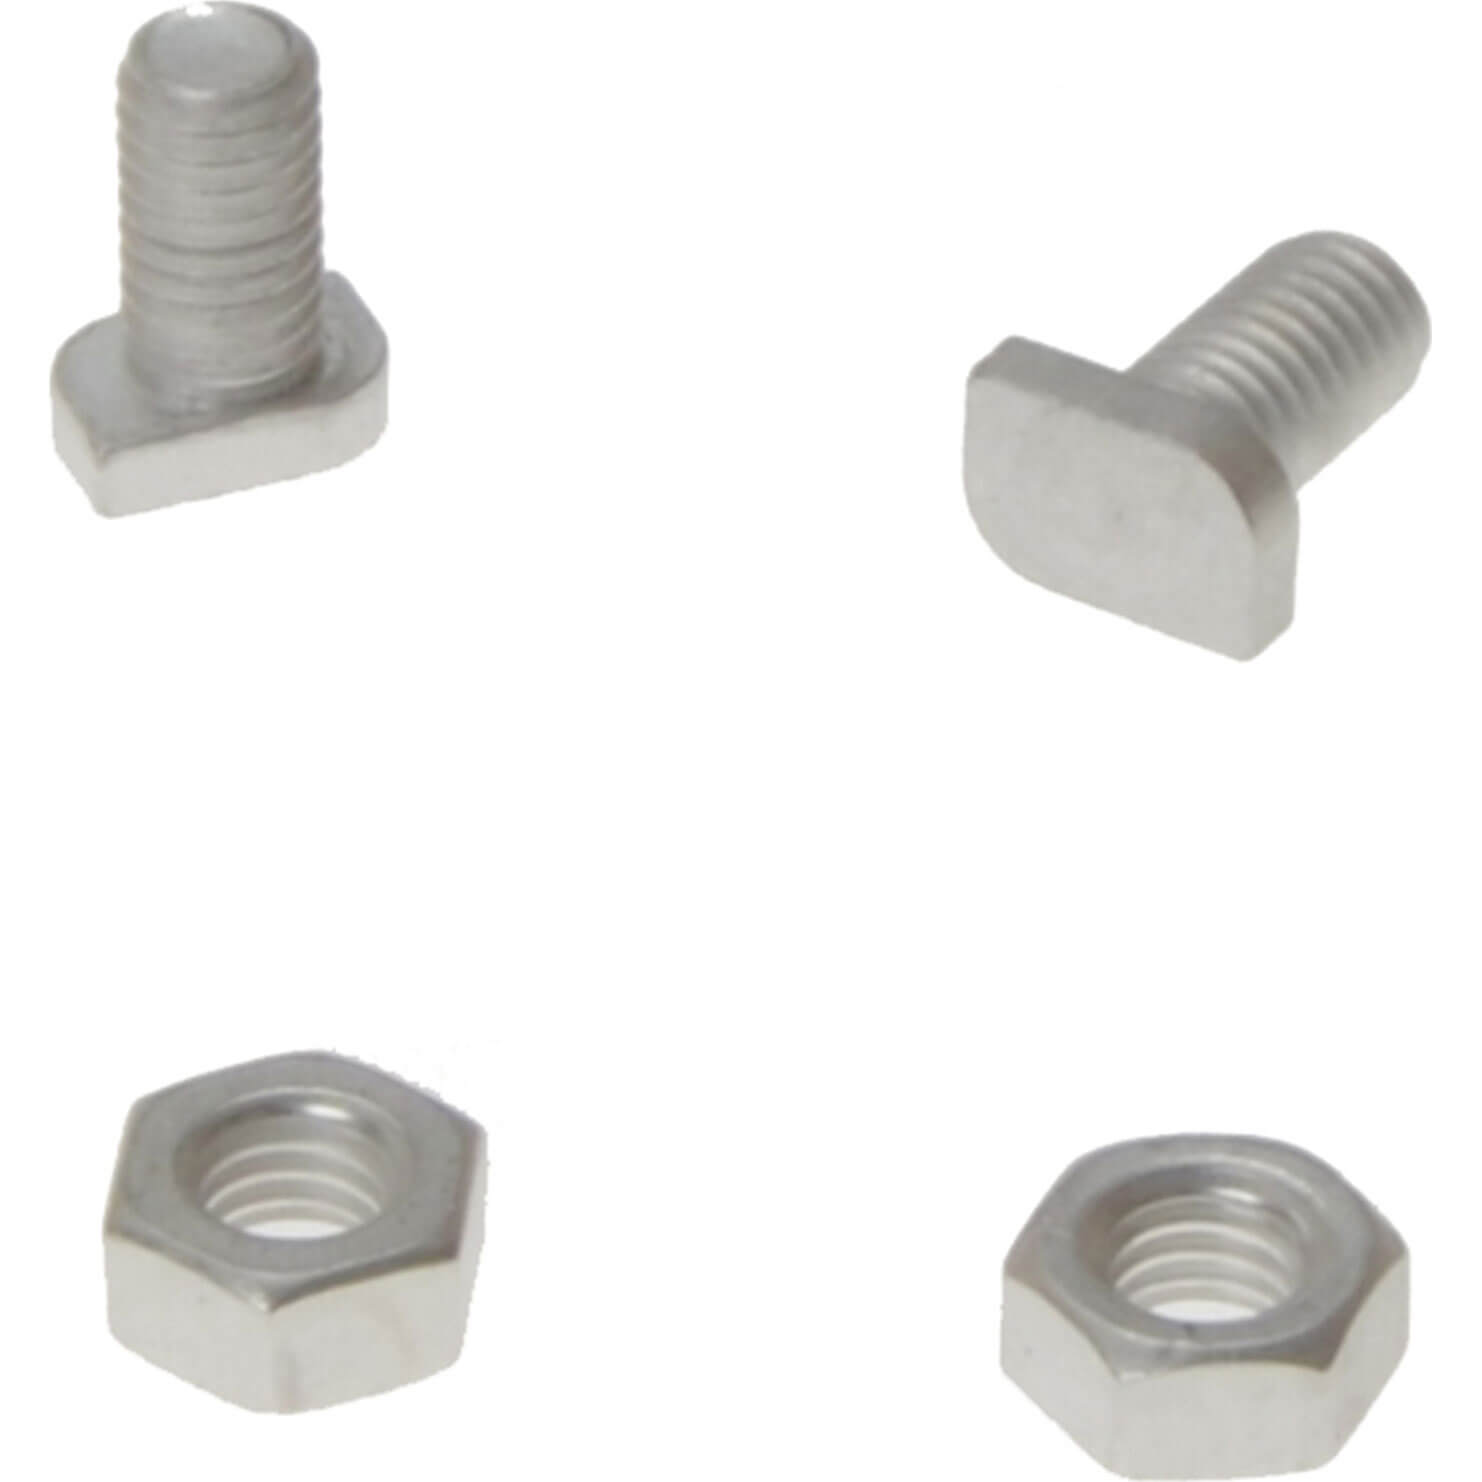 ALM Manufacturing GH003 Aluminium Cropped Head Bolts and Nuts Pack of 20